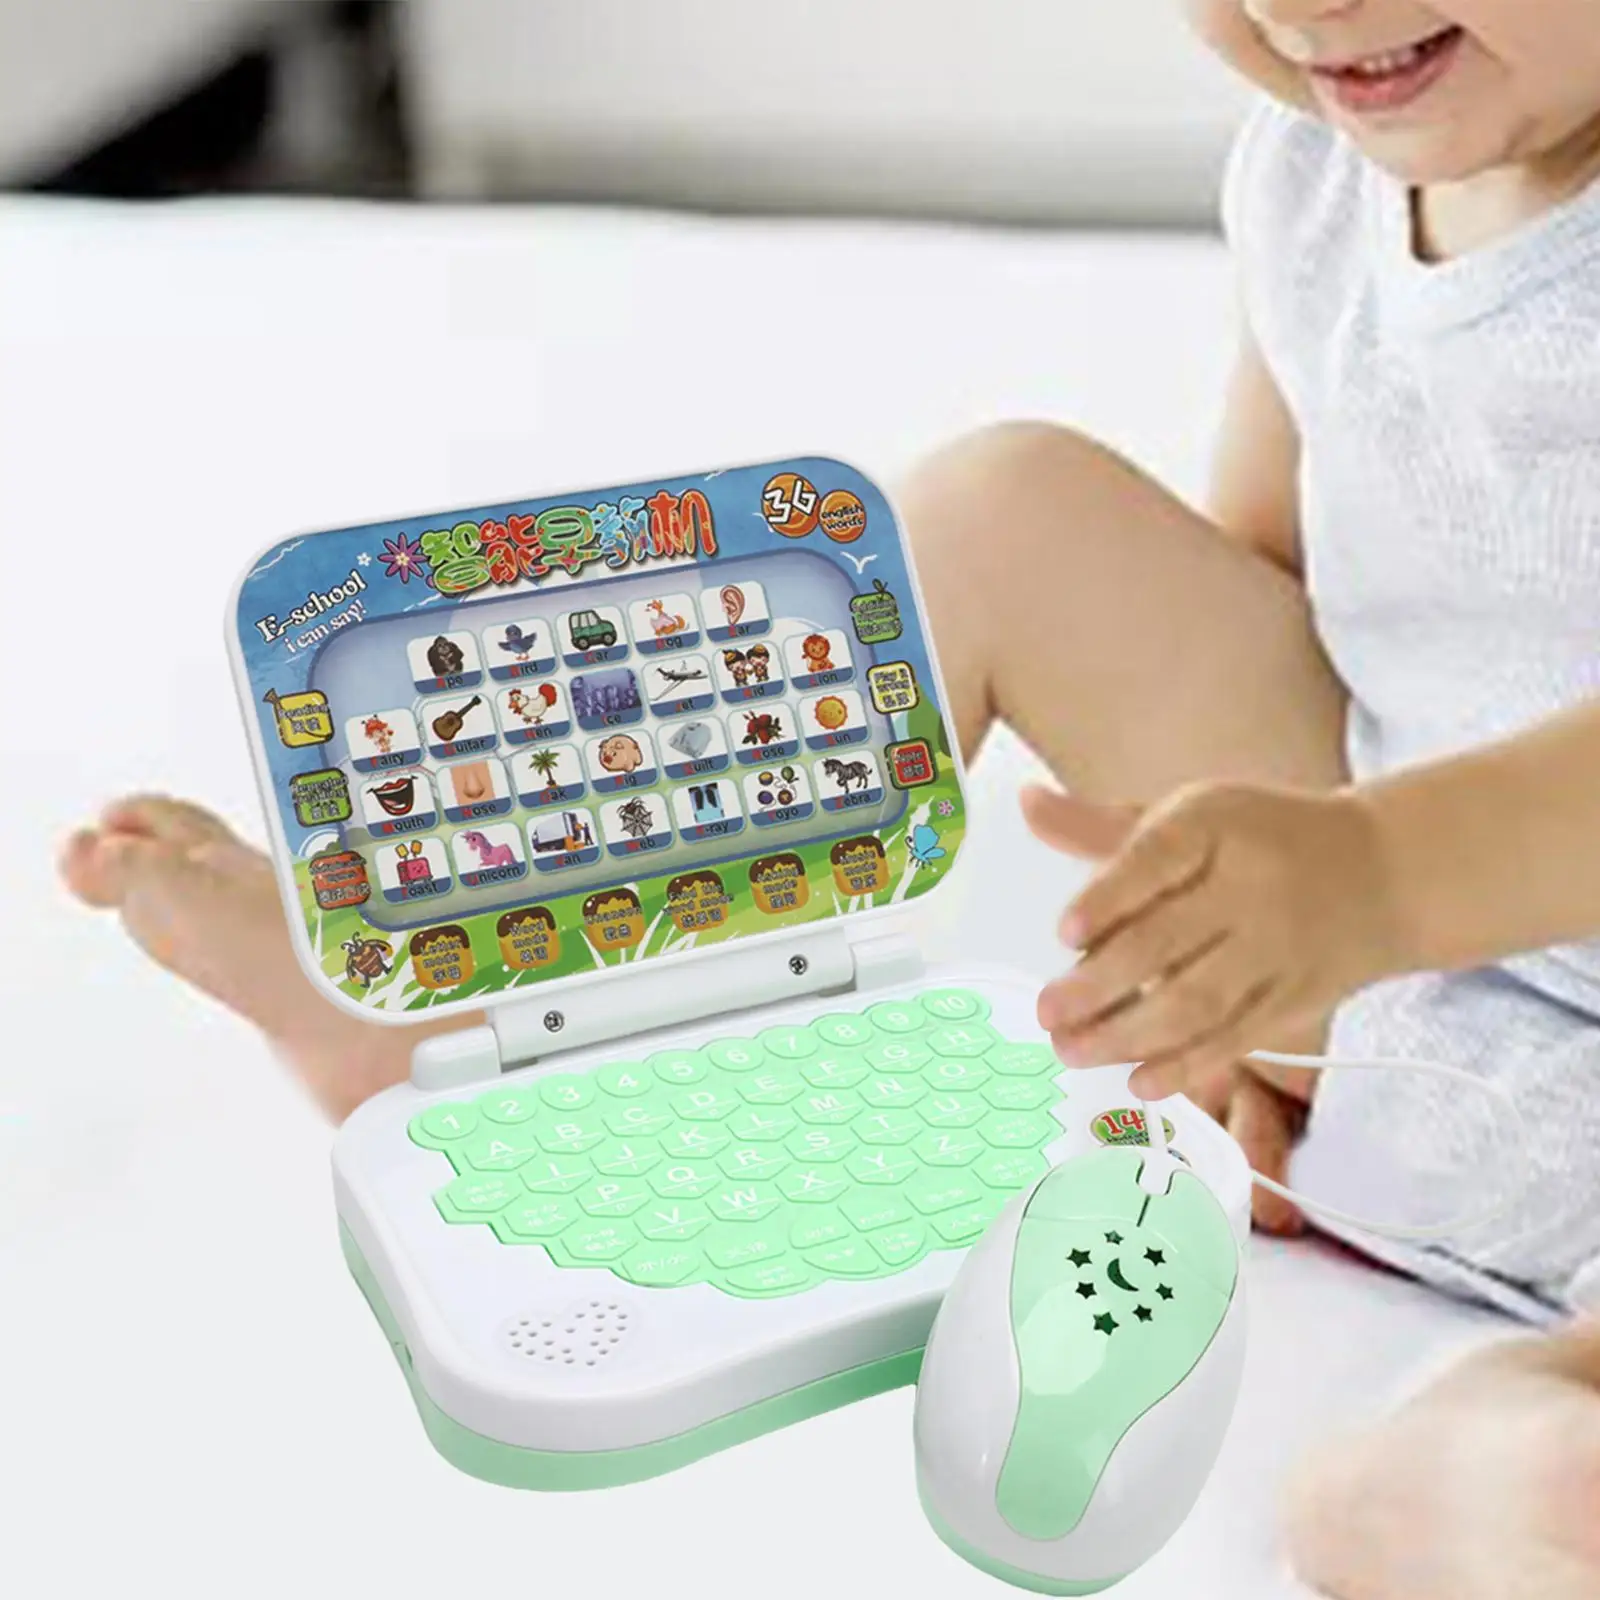 Multifunction Handheld Language Learning Machine Study Game Computer Child Interactive Learning Pad Tablet for Kids